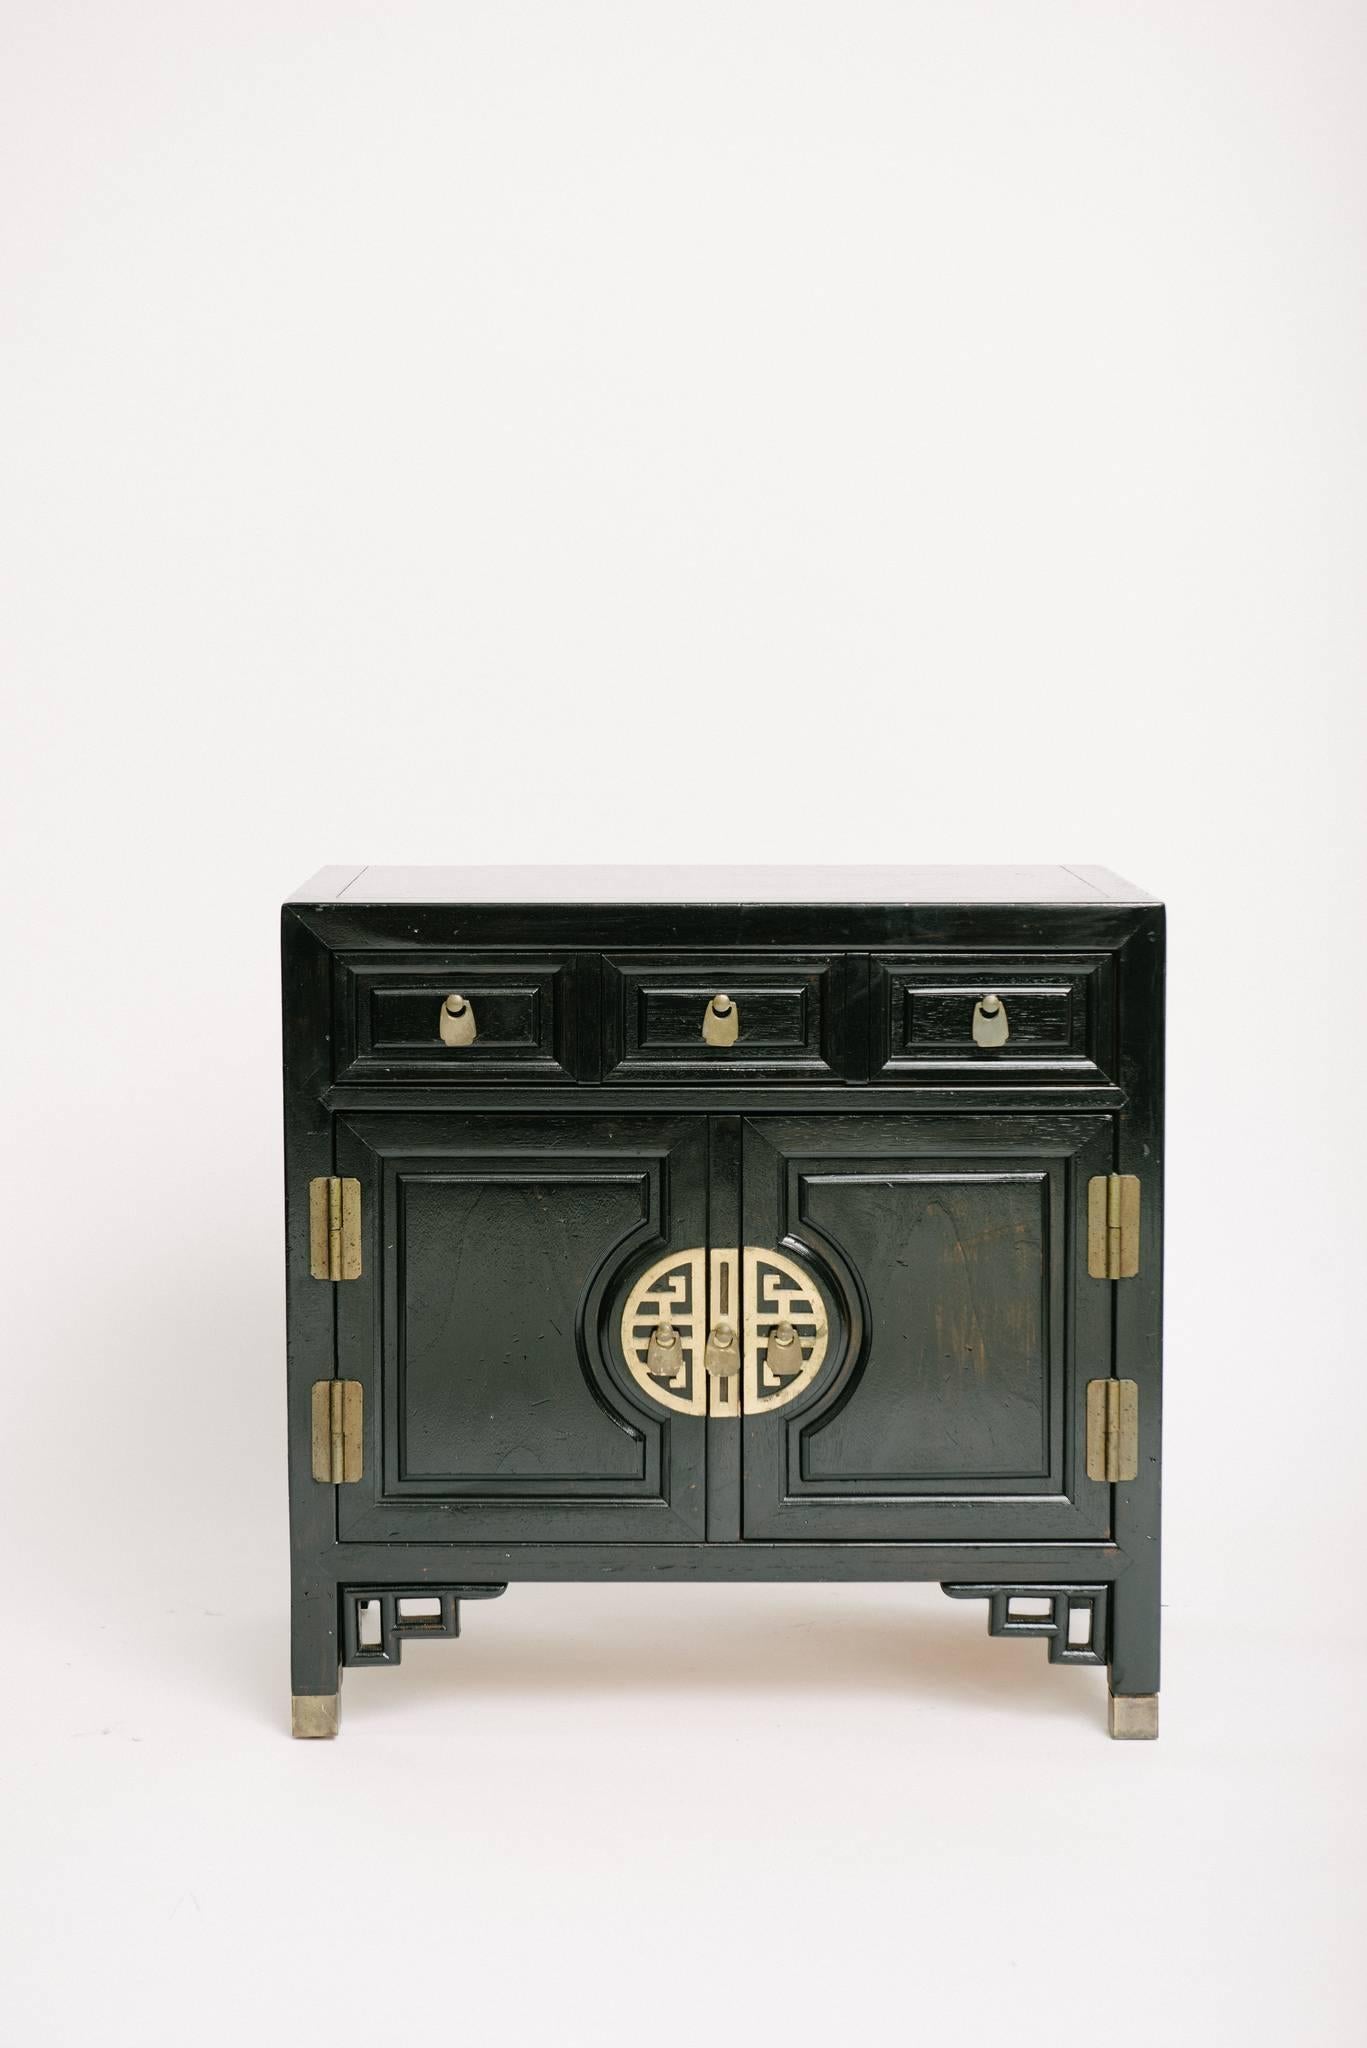 Pair of Chinese Chippendale cabinets by Ray Sabota. Accentuated by chunky Greek key brass hardware and faux bamboo style fretwork trim. Manufactured by Century Furniture. Great as nightstands or end tables.